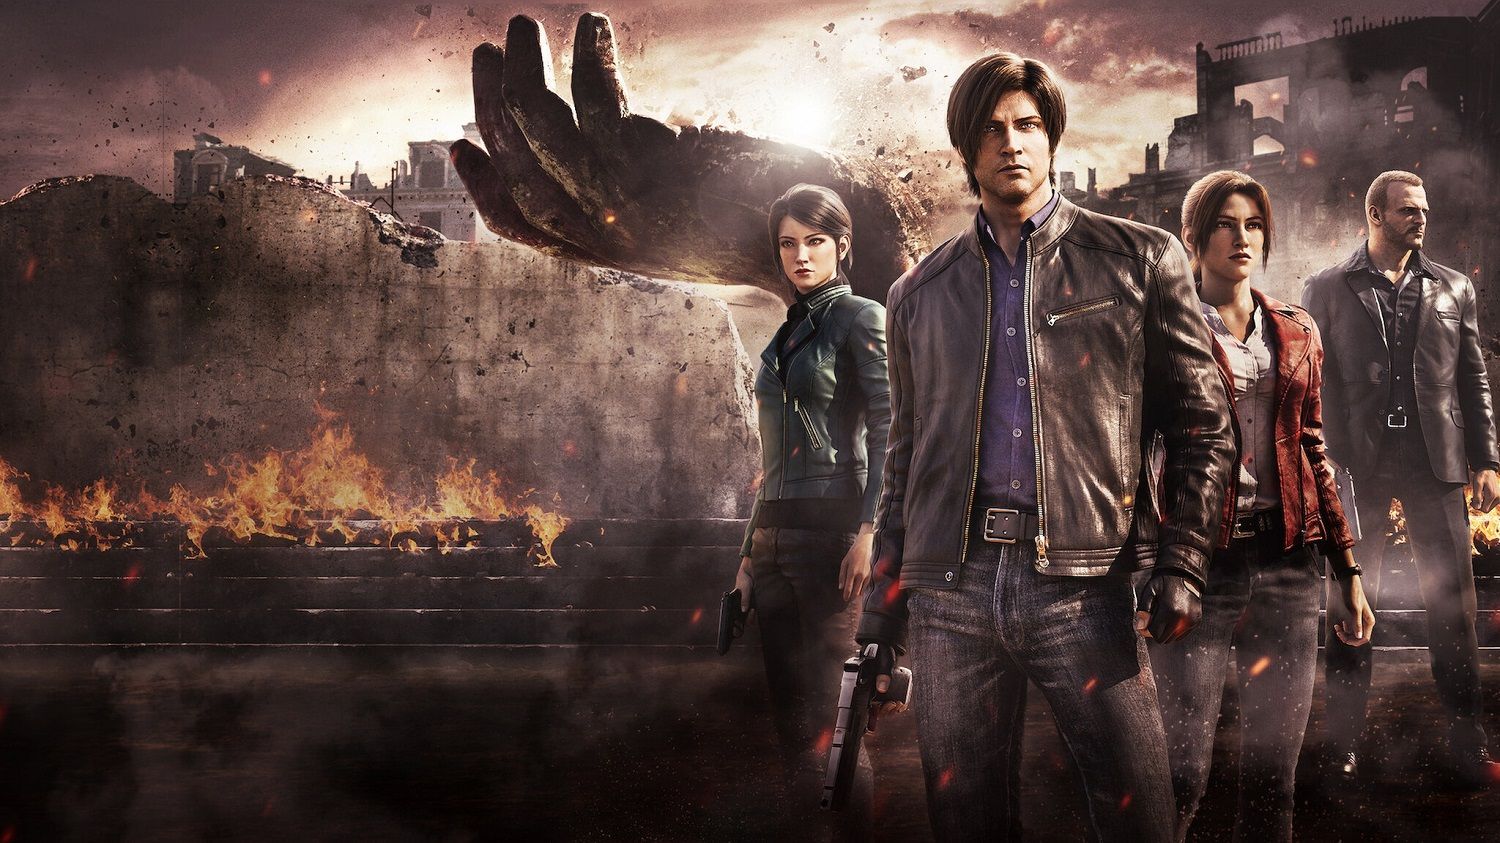 How to watch the 'Resident Evil' movies and TV shows in order